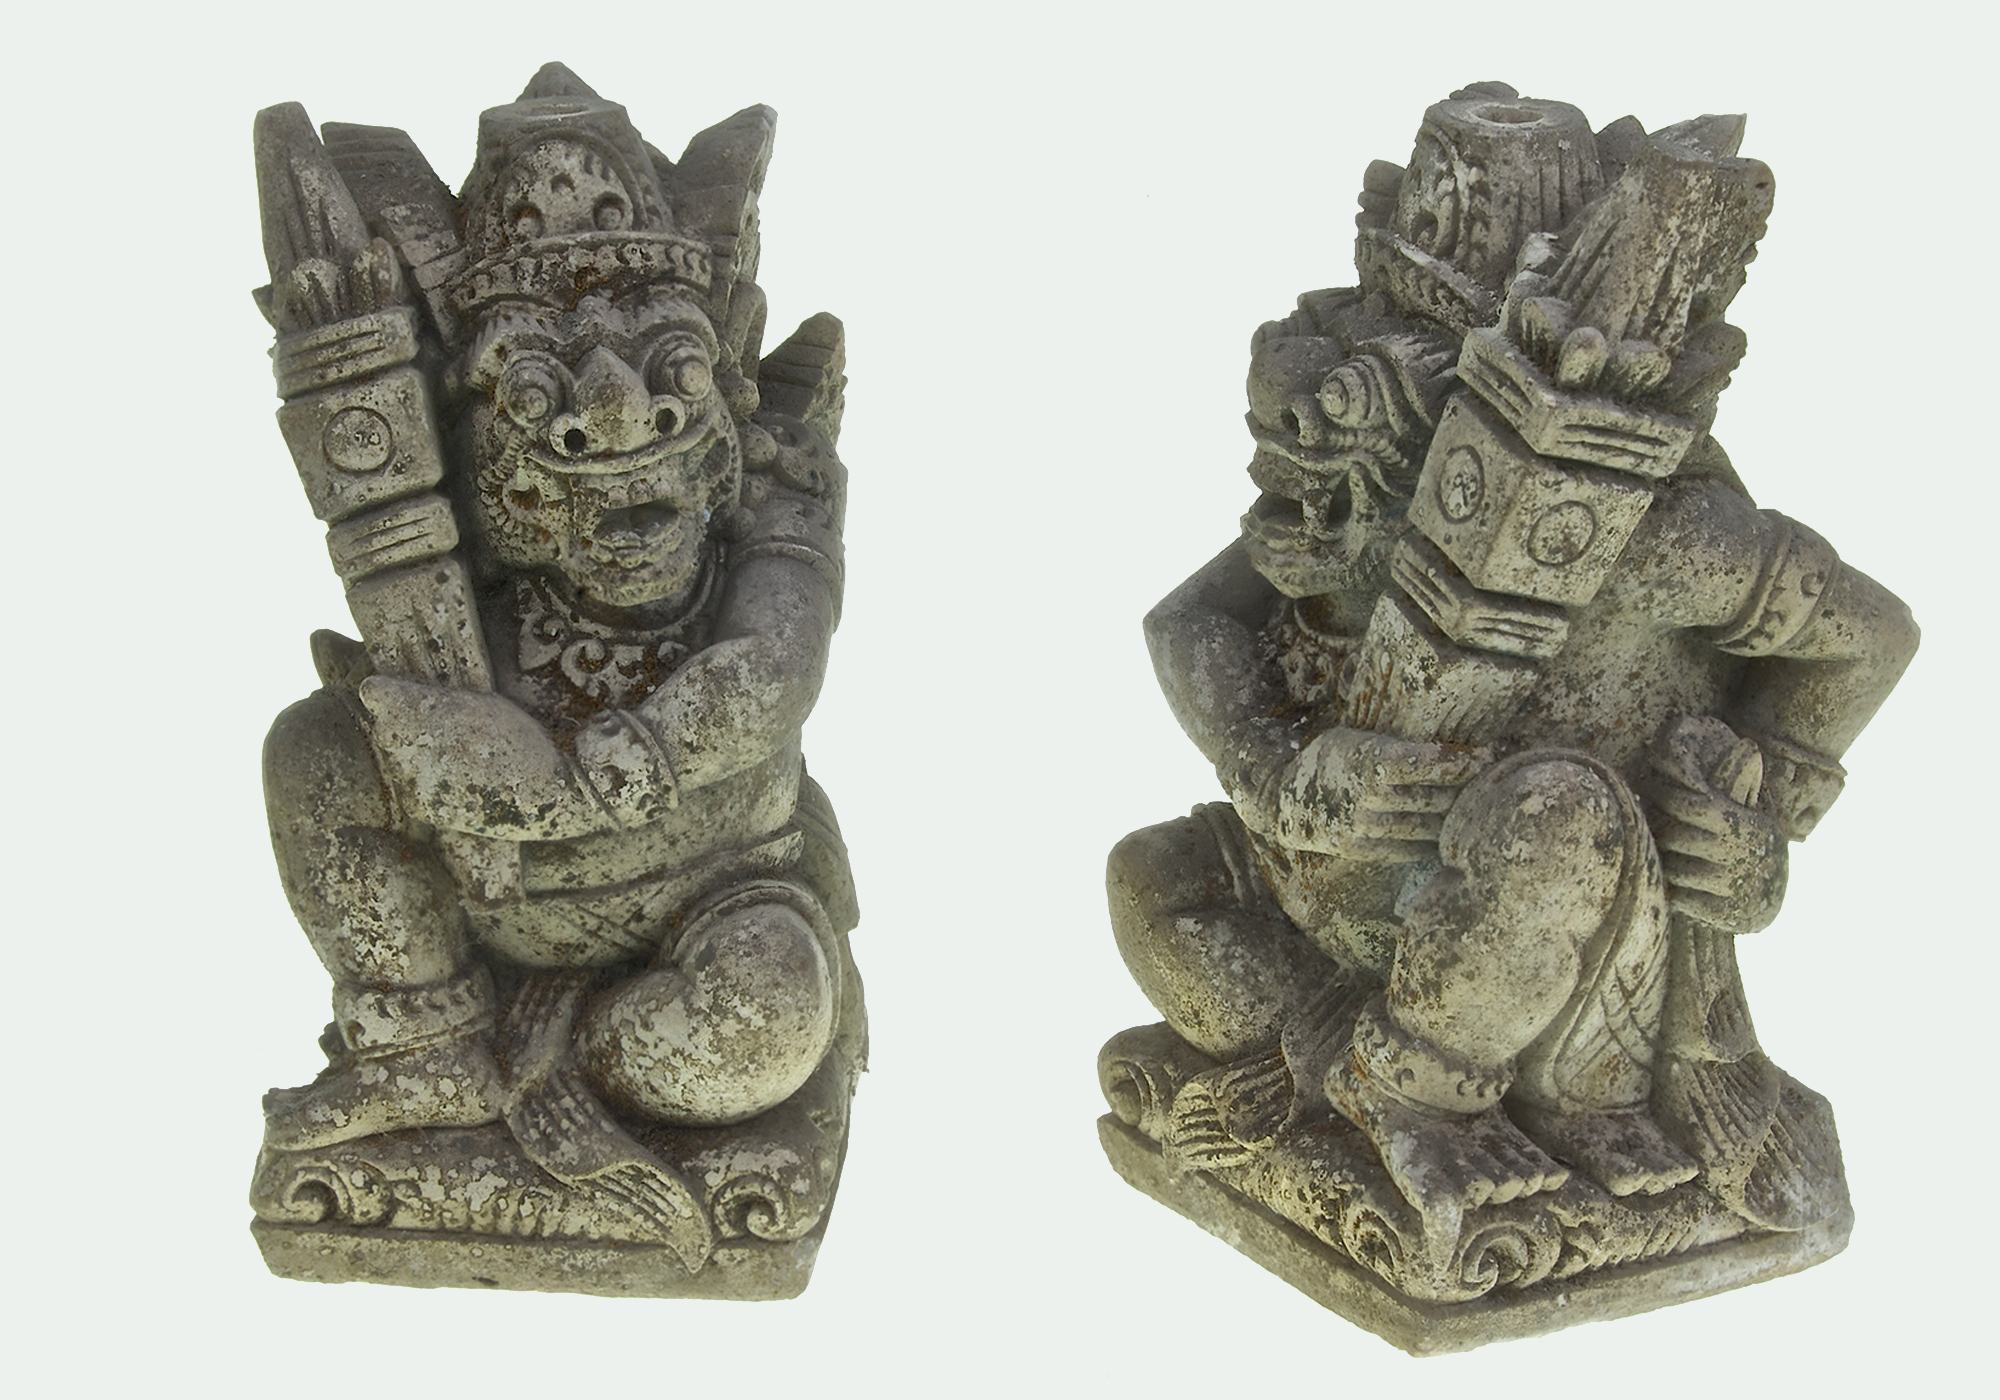 PAIR OF BALINESE HAND CARVED ENTRANCE GODS